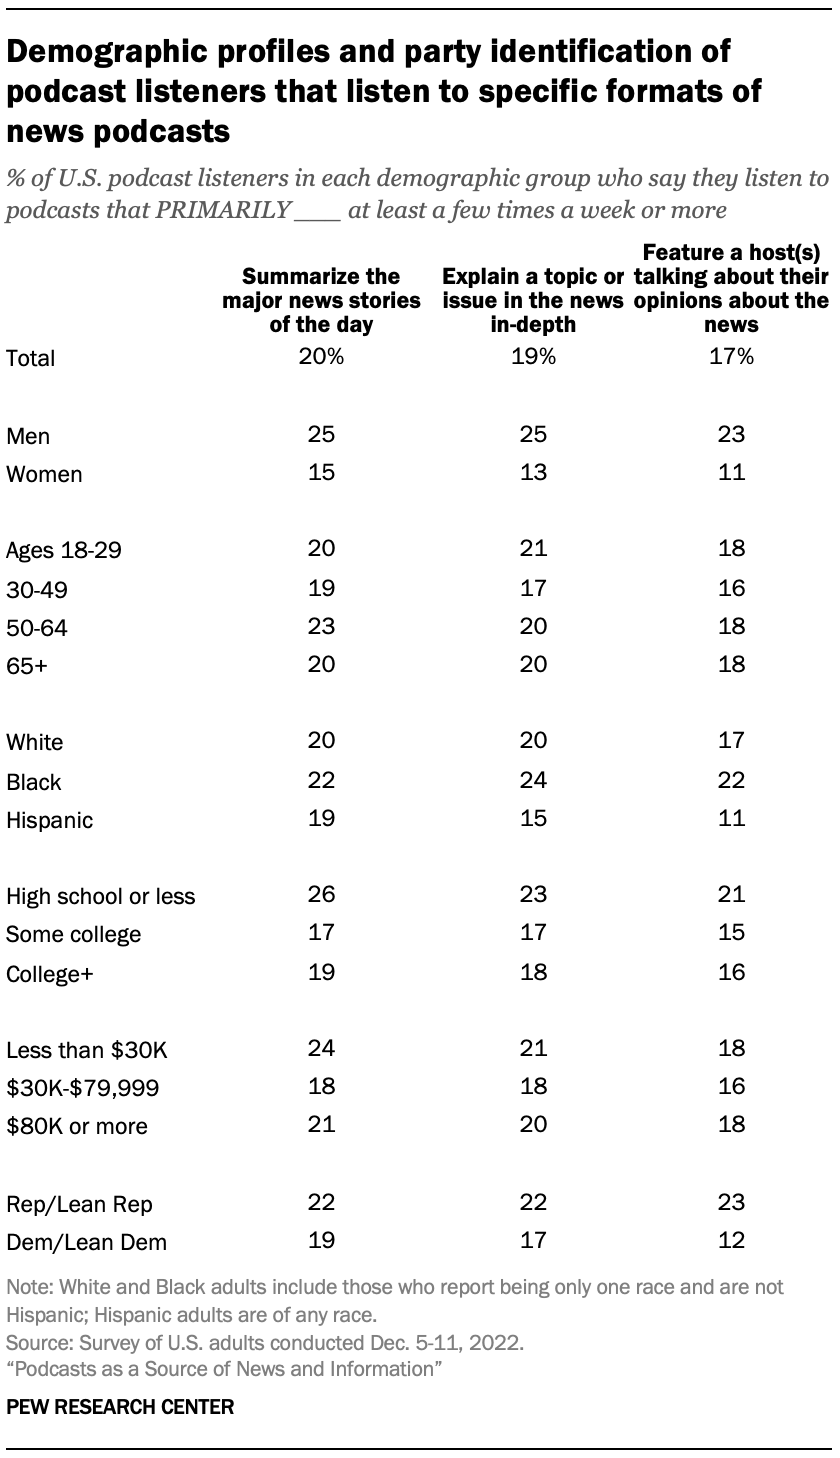 A table showing Demographic profiles and party identification of podcast listeners that listen to specific formats of news podcasts